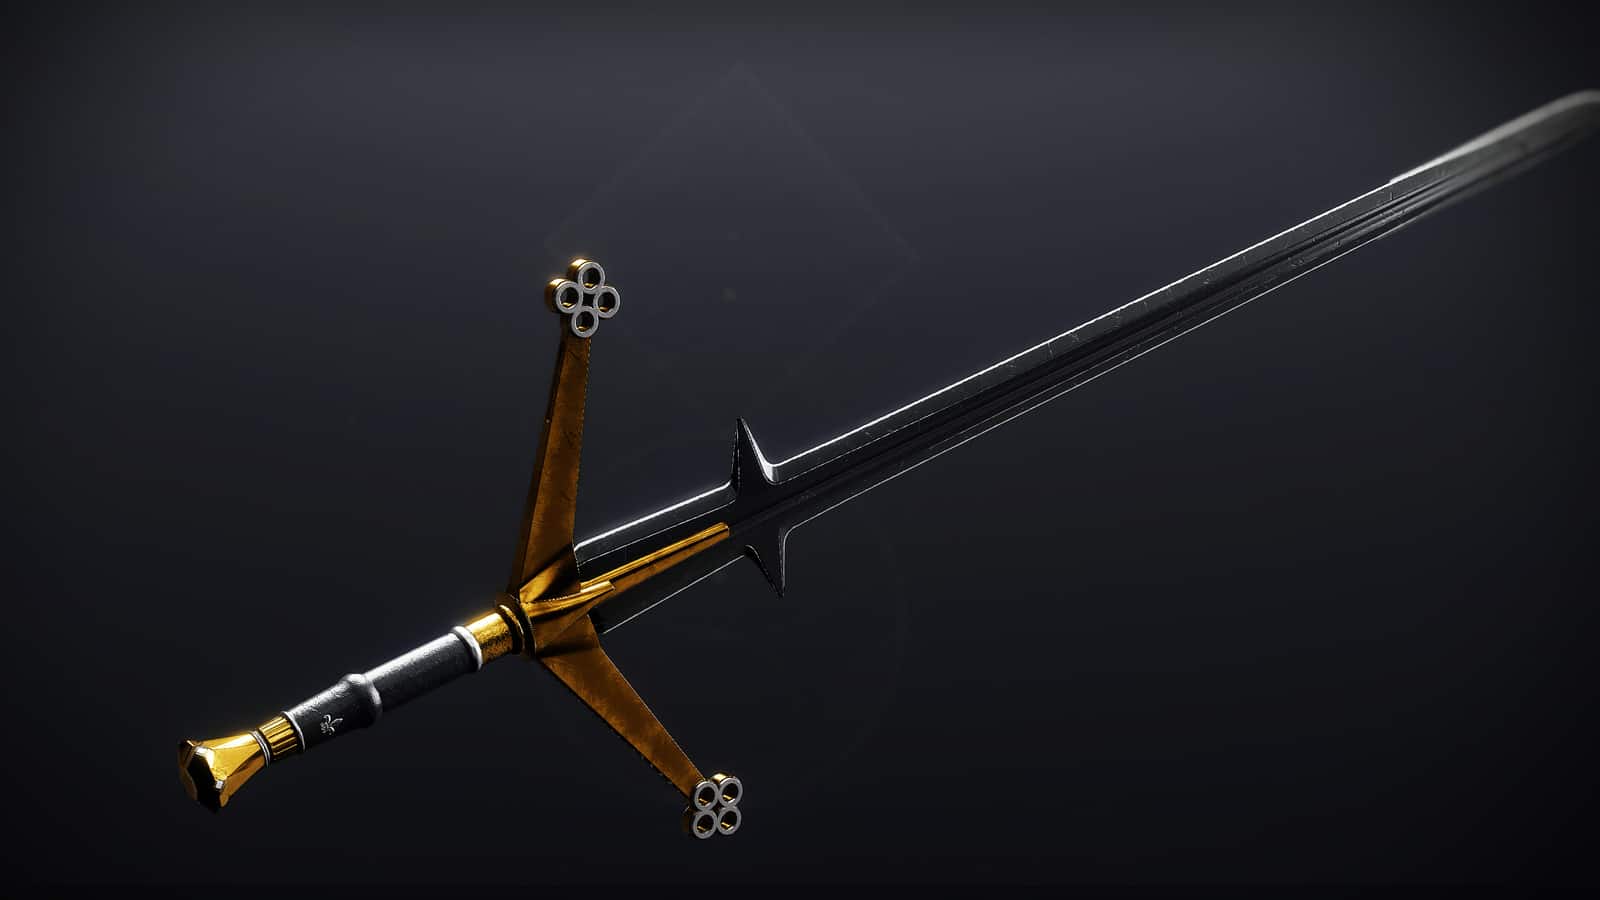 Hero of Ages Destiny 2 featured sword